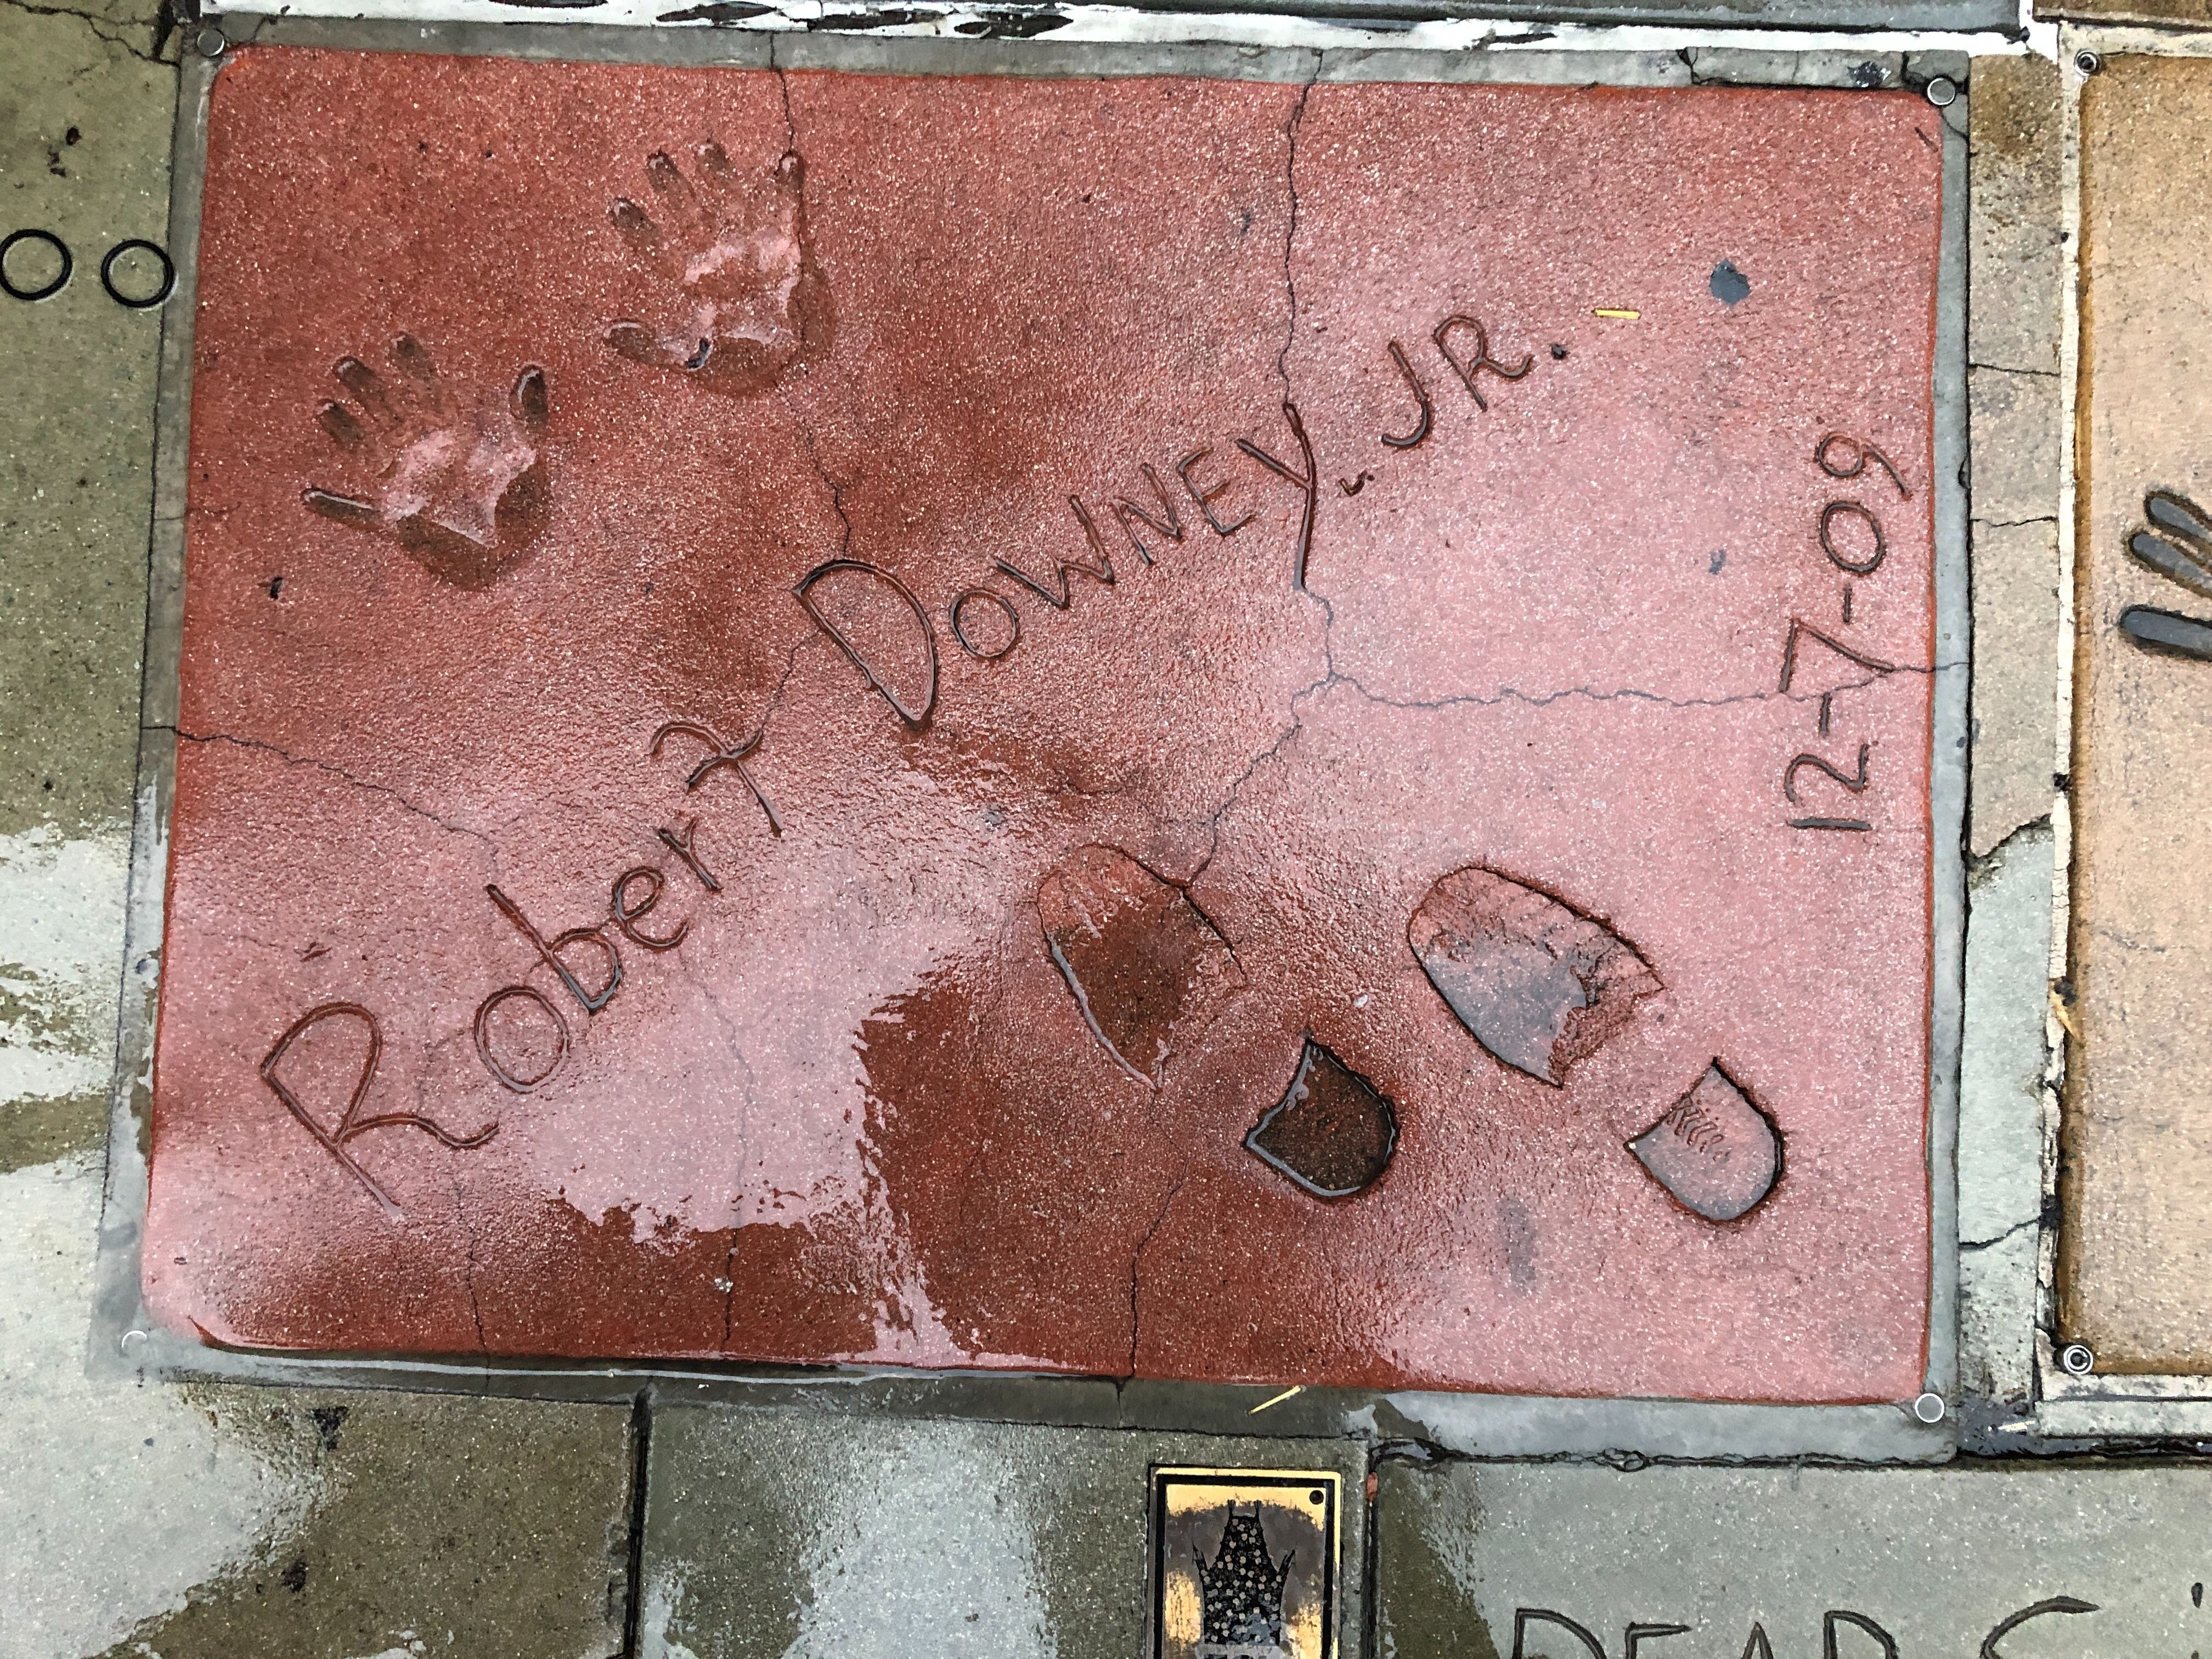 Hand and foot prints of RDJ